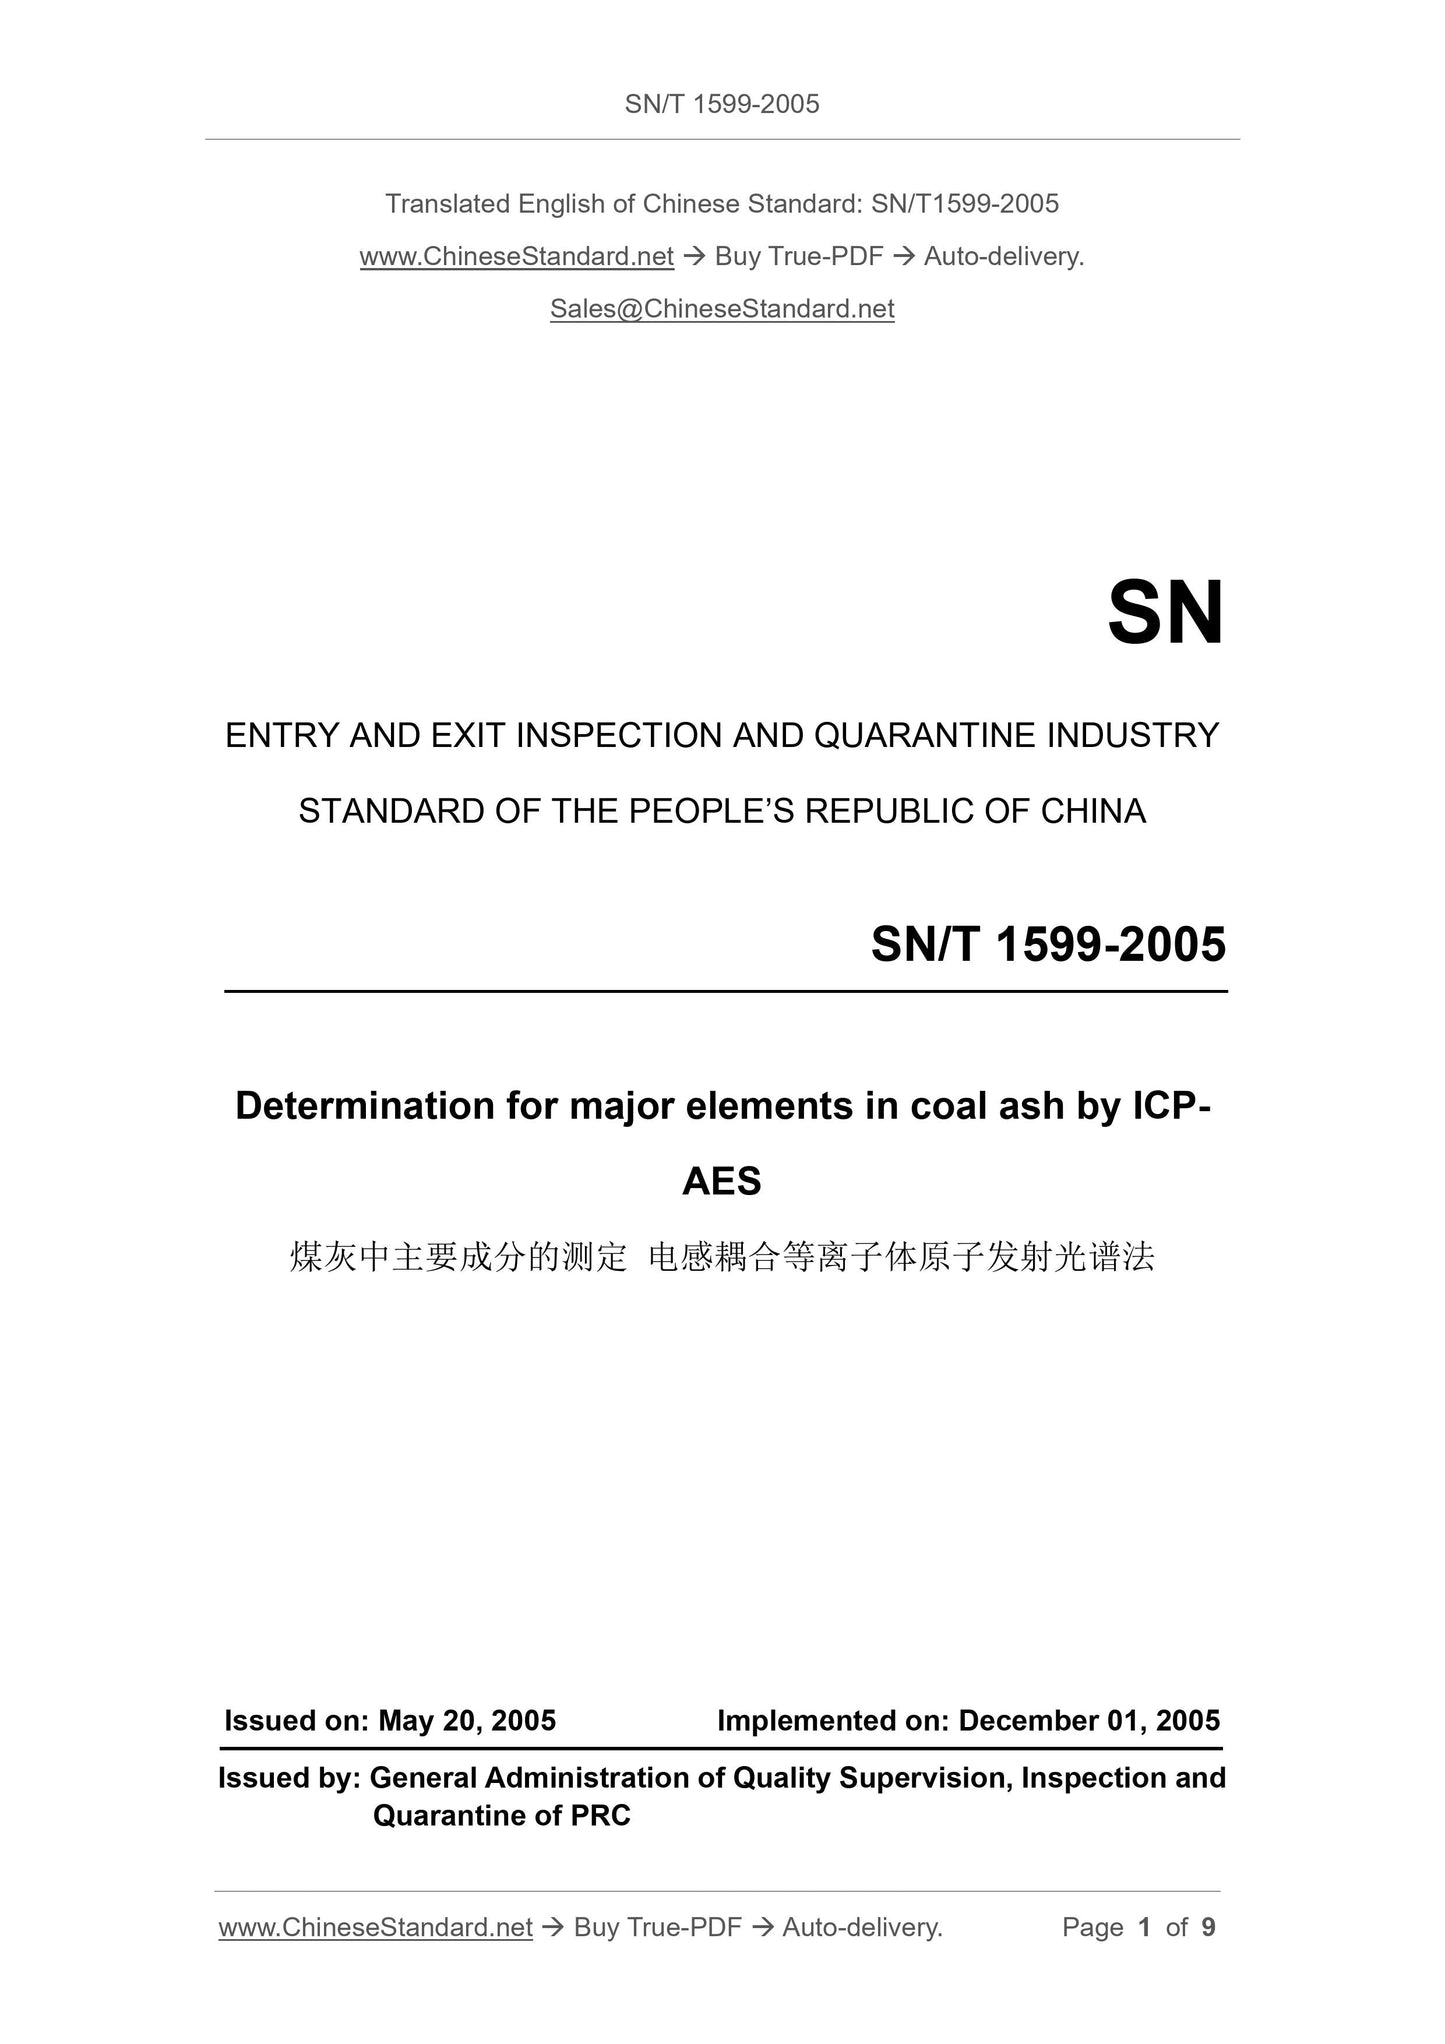 SN/T 1599-2005 Page 1